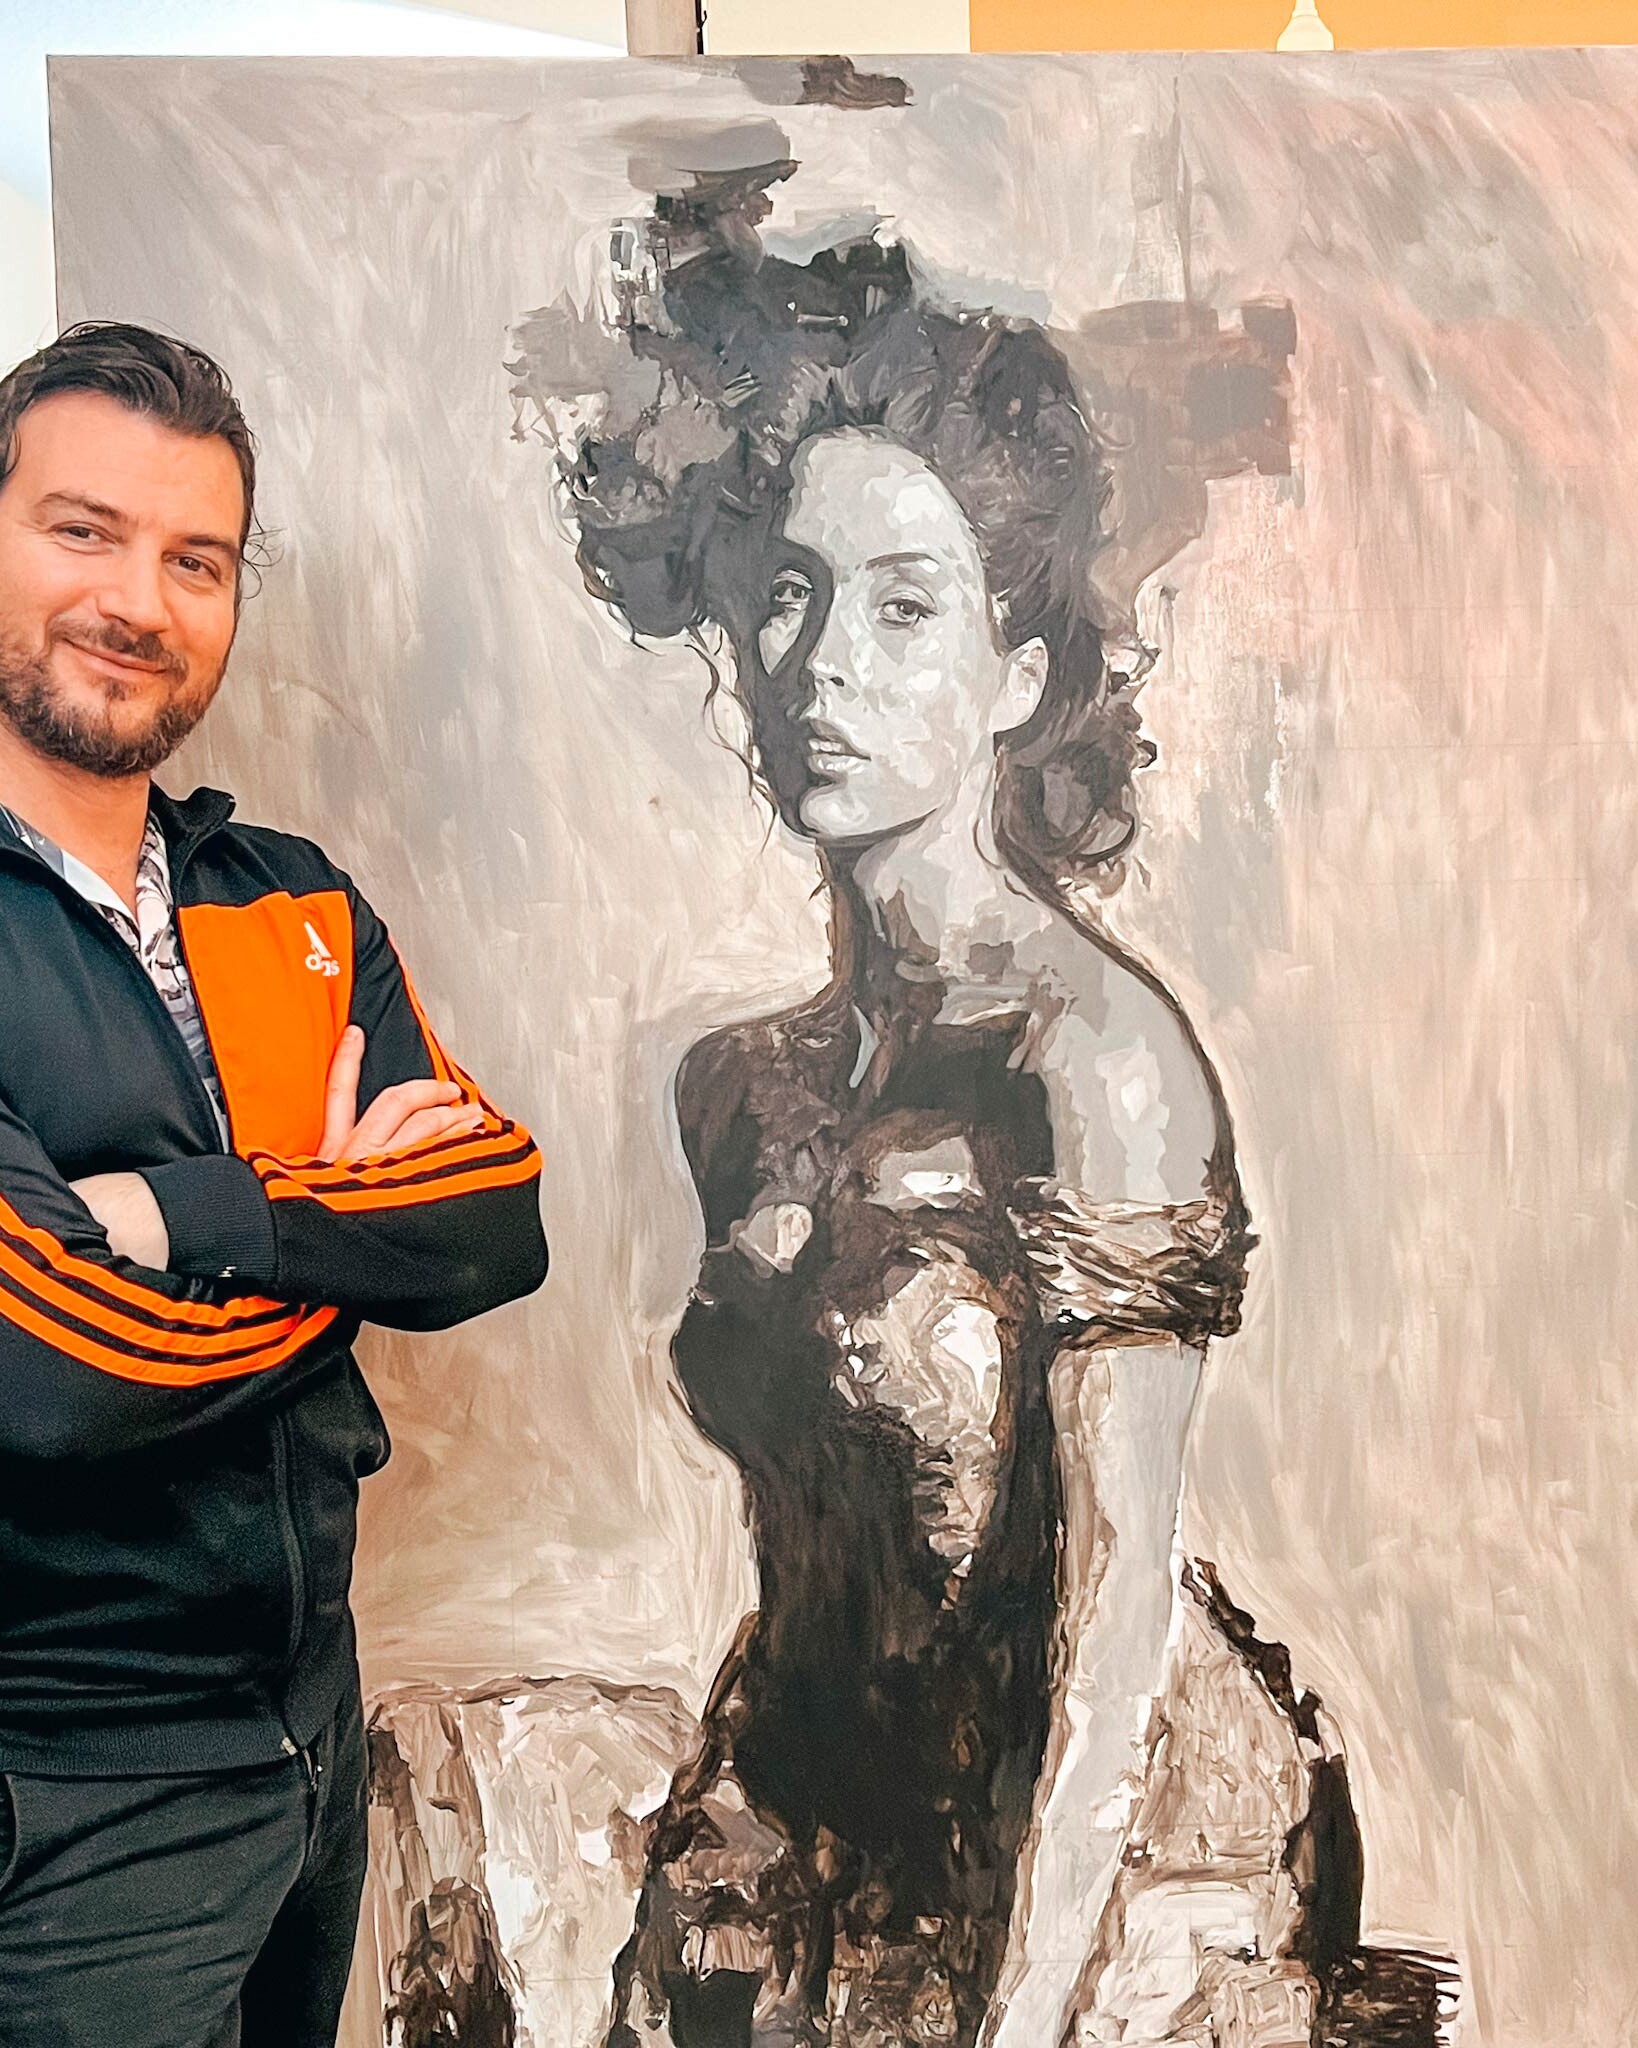 Artist standing next to a completed underpainting on a canvas